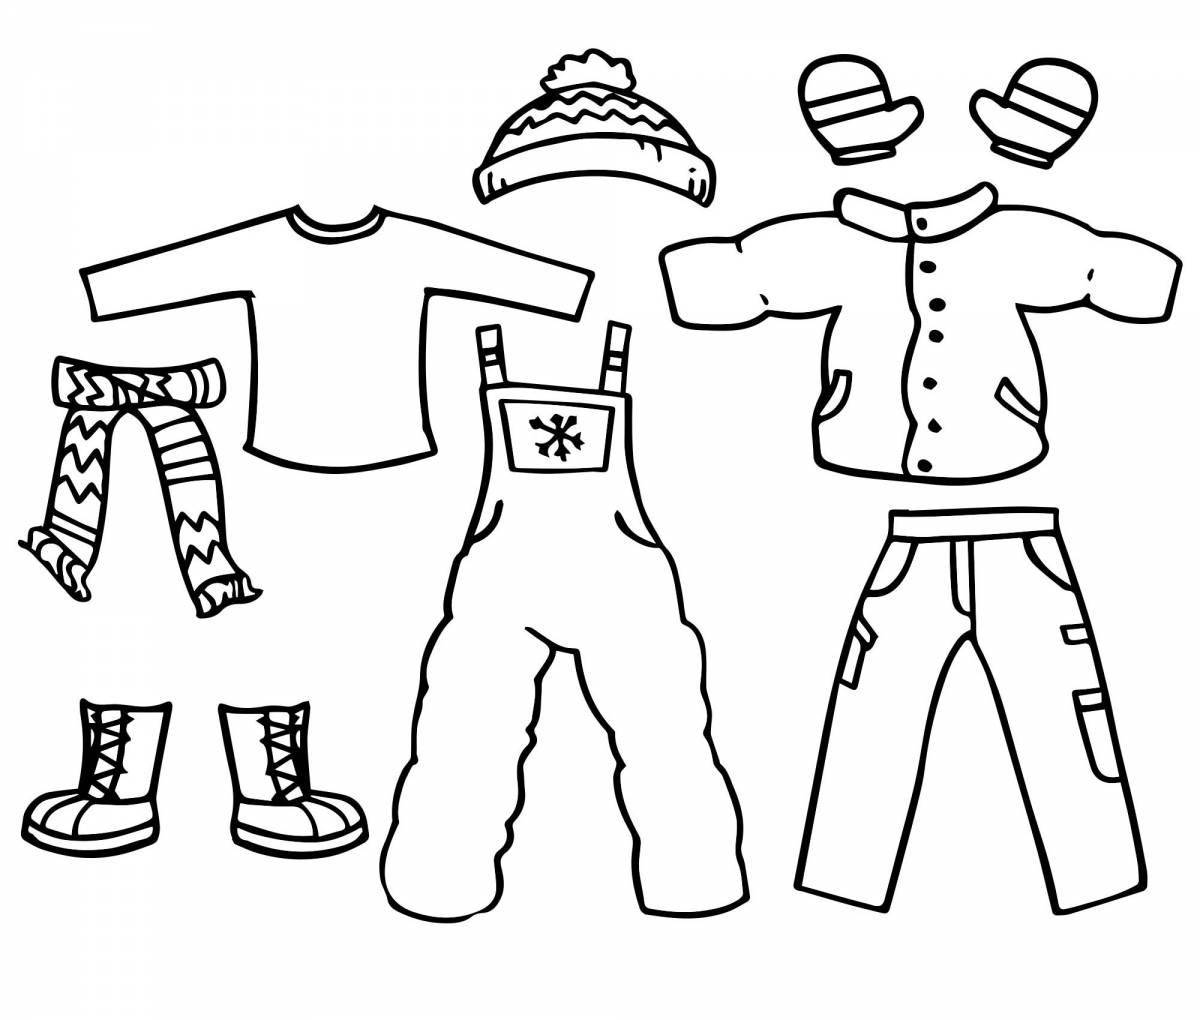 Playful costume coloring page for kids